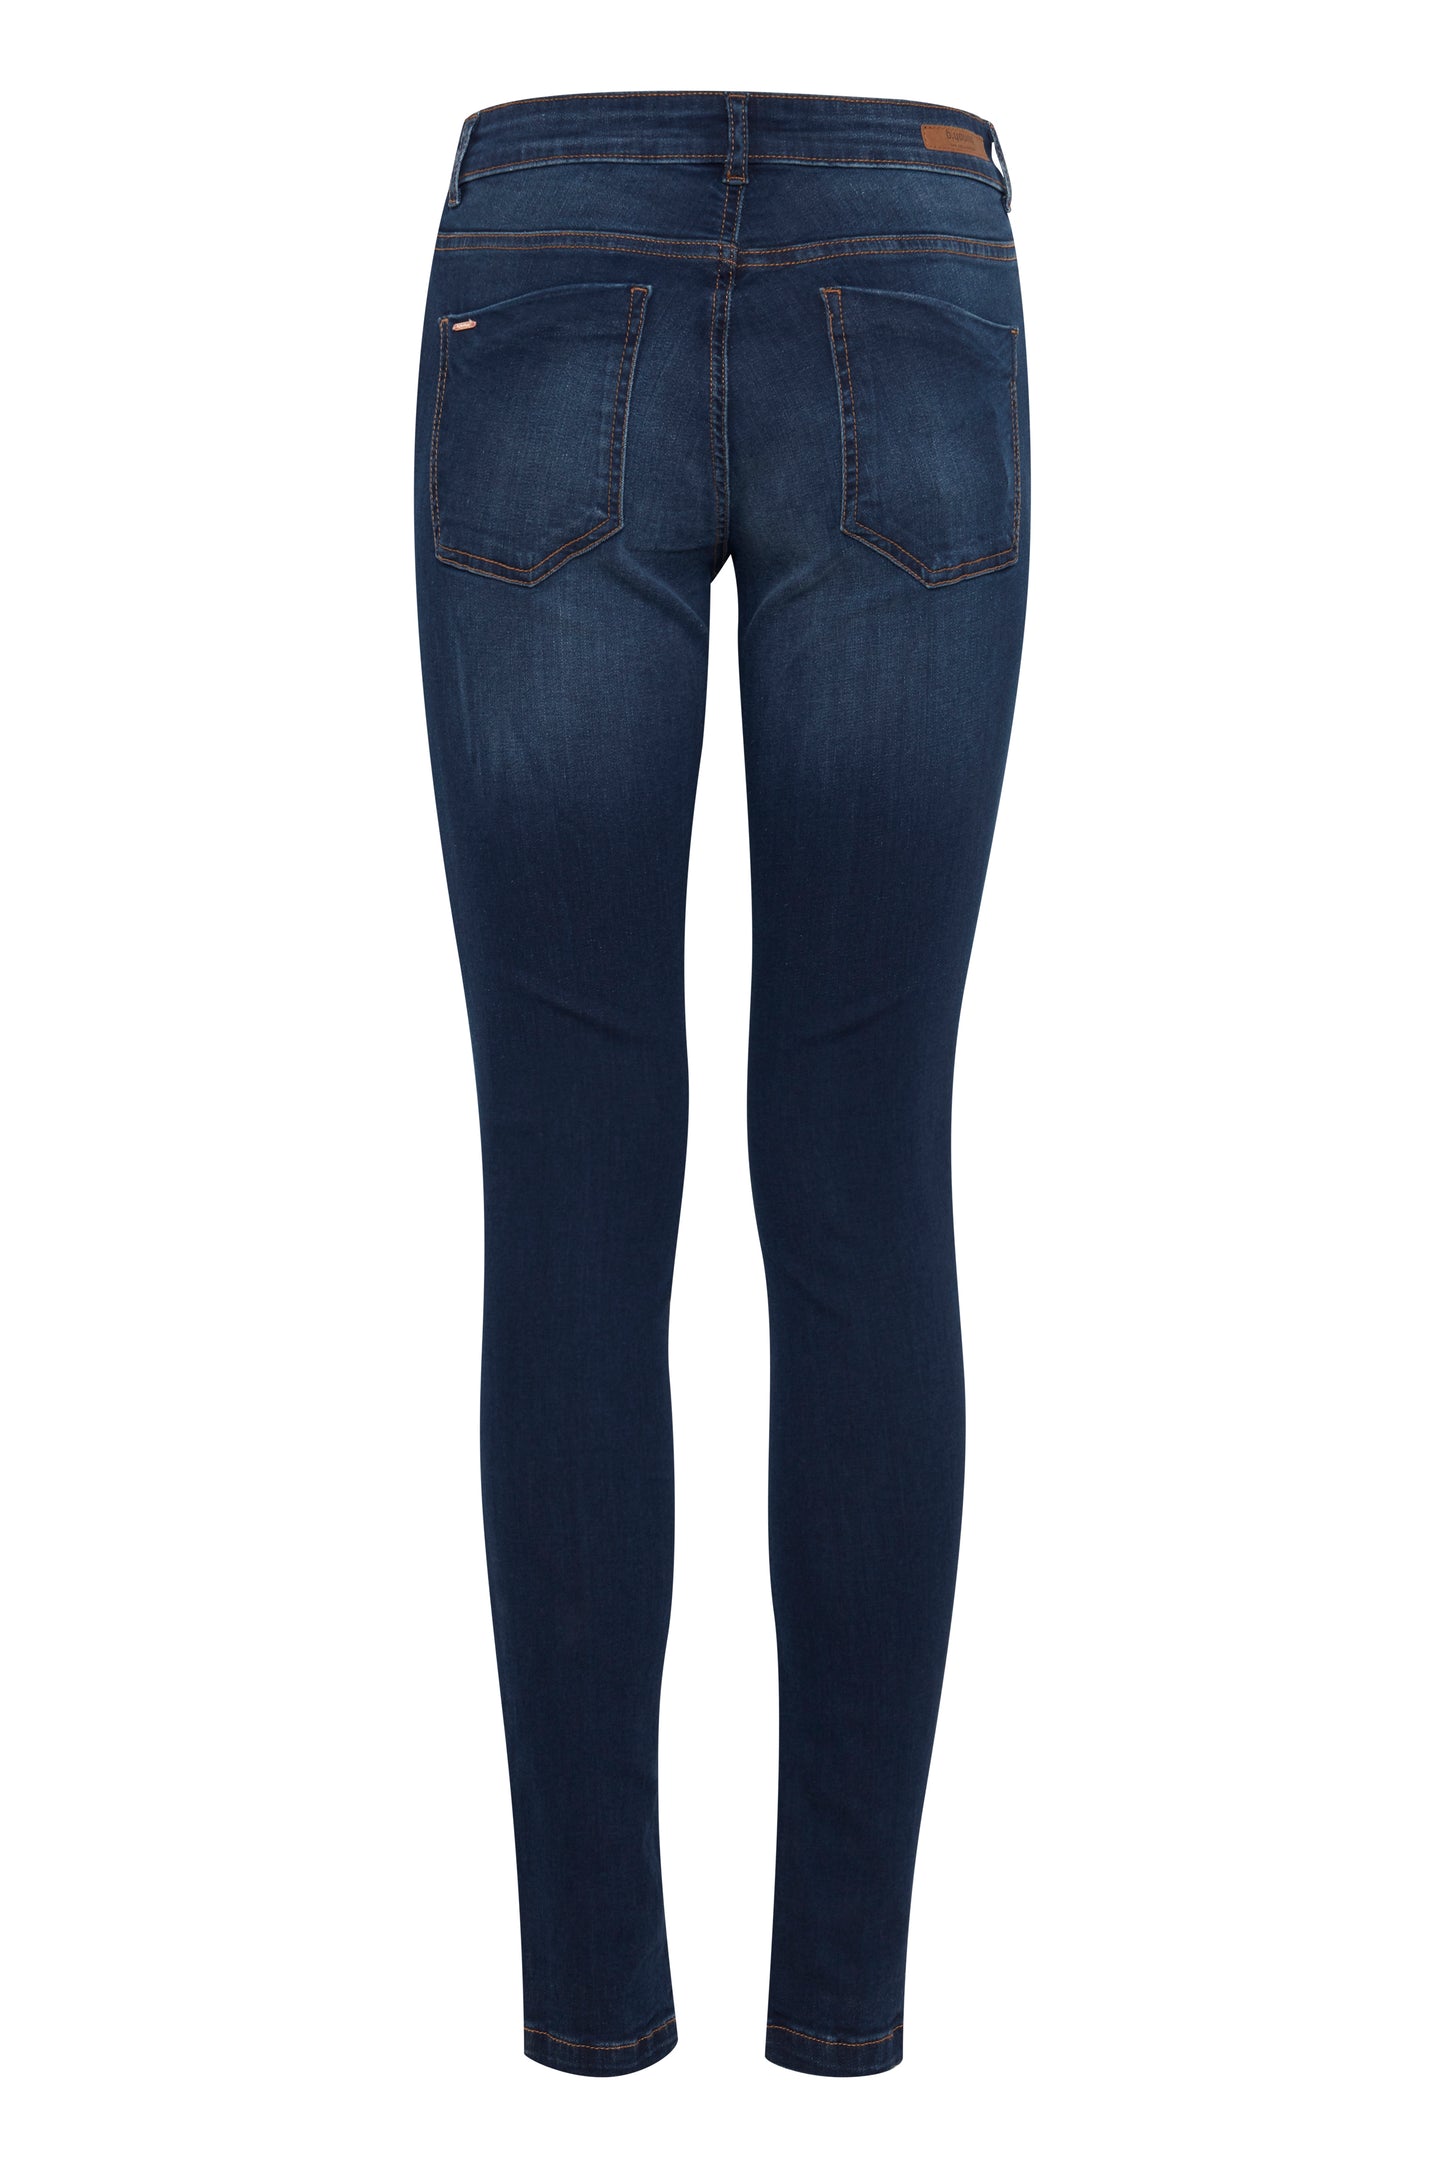 b.young Dark Ink Skinny Jeans